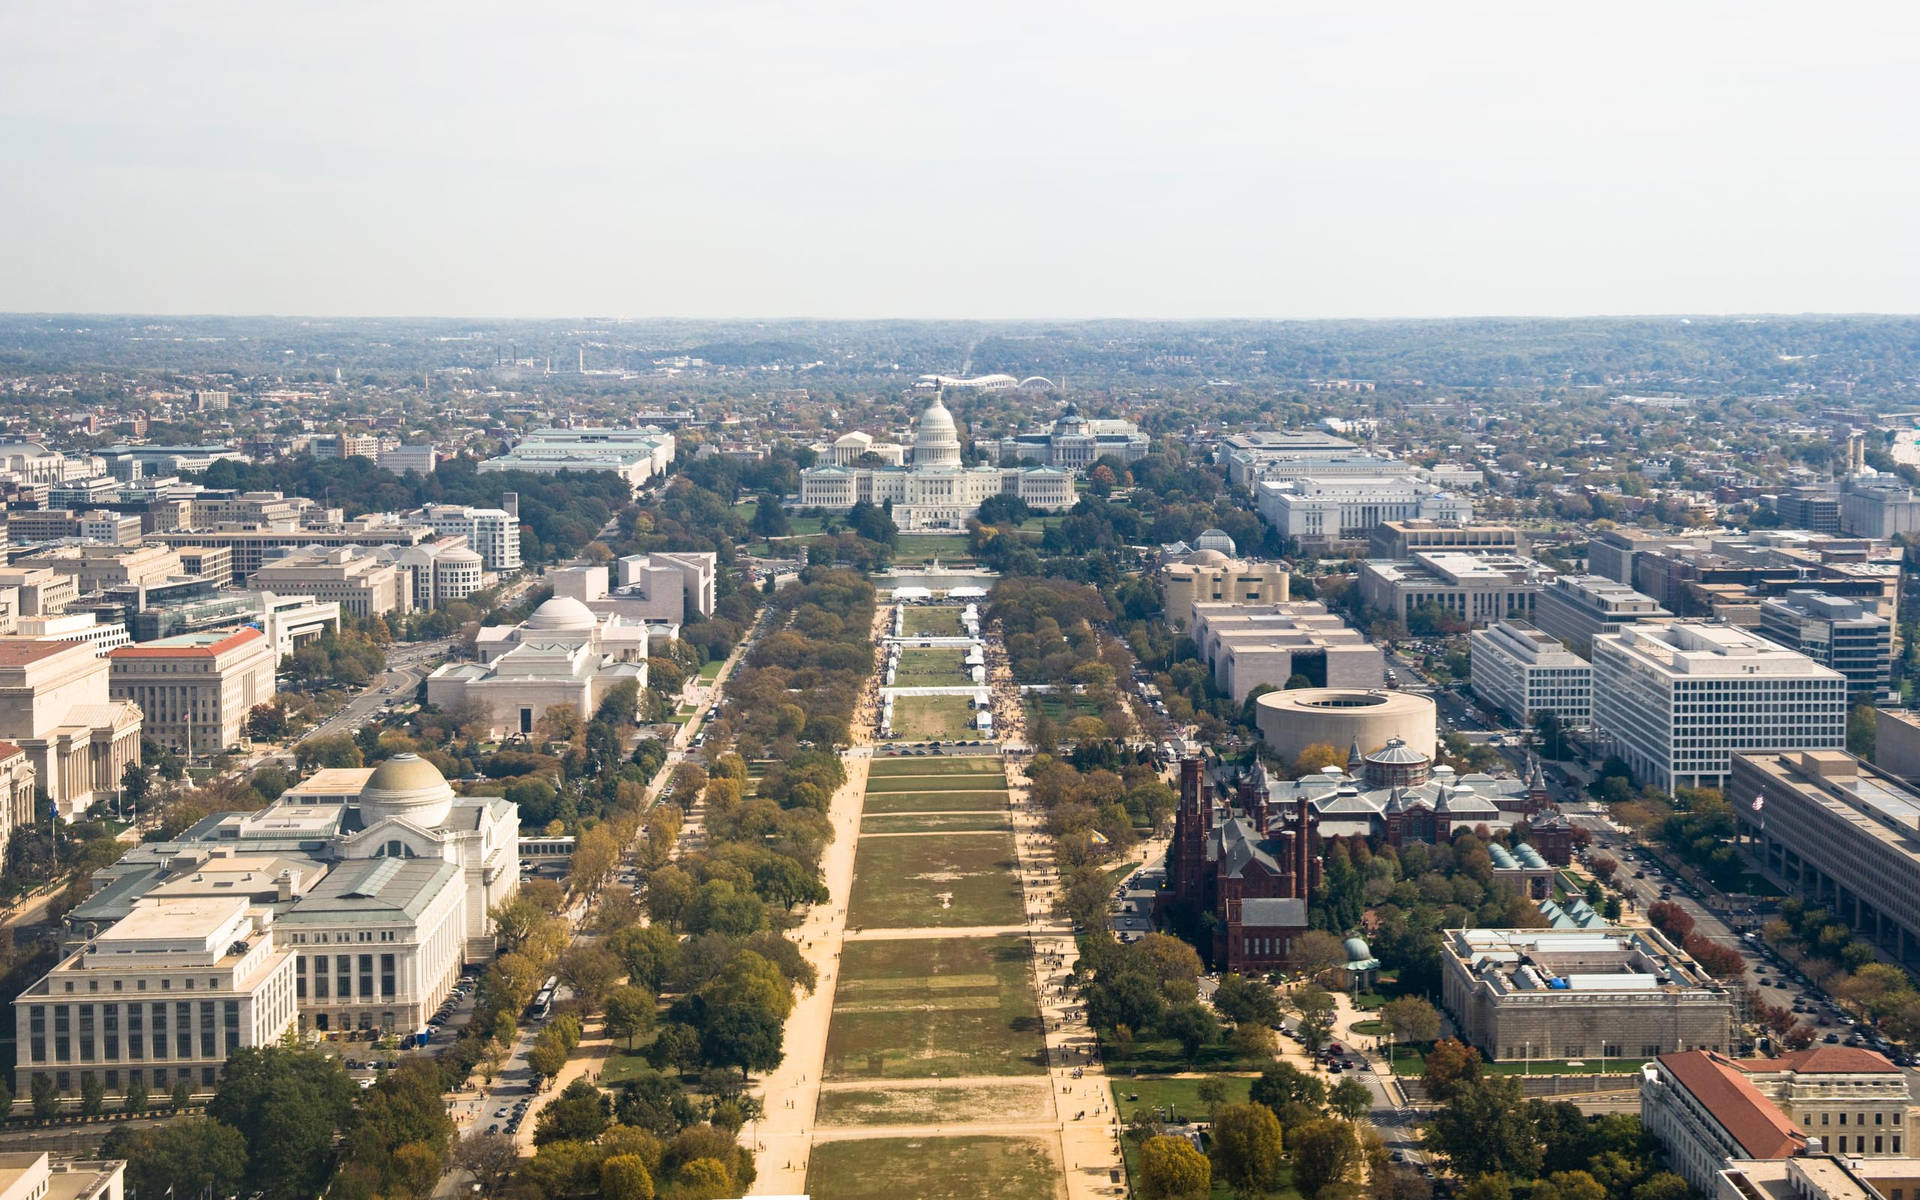 Caption: Aerial View Of Washington National Mall Background